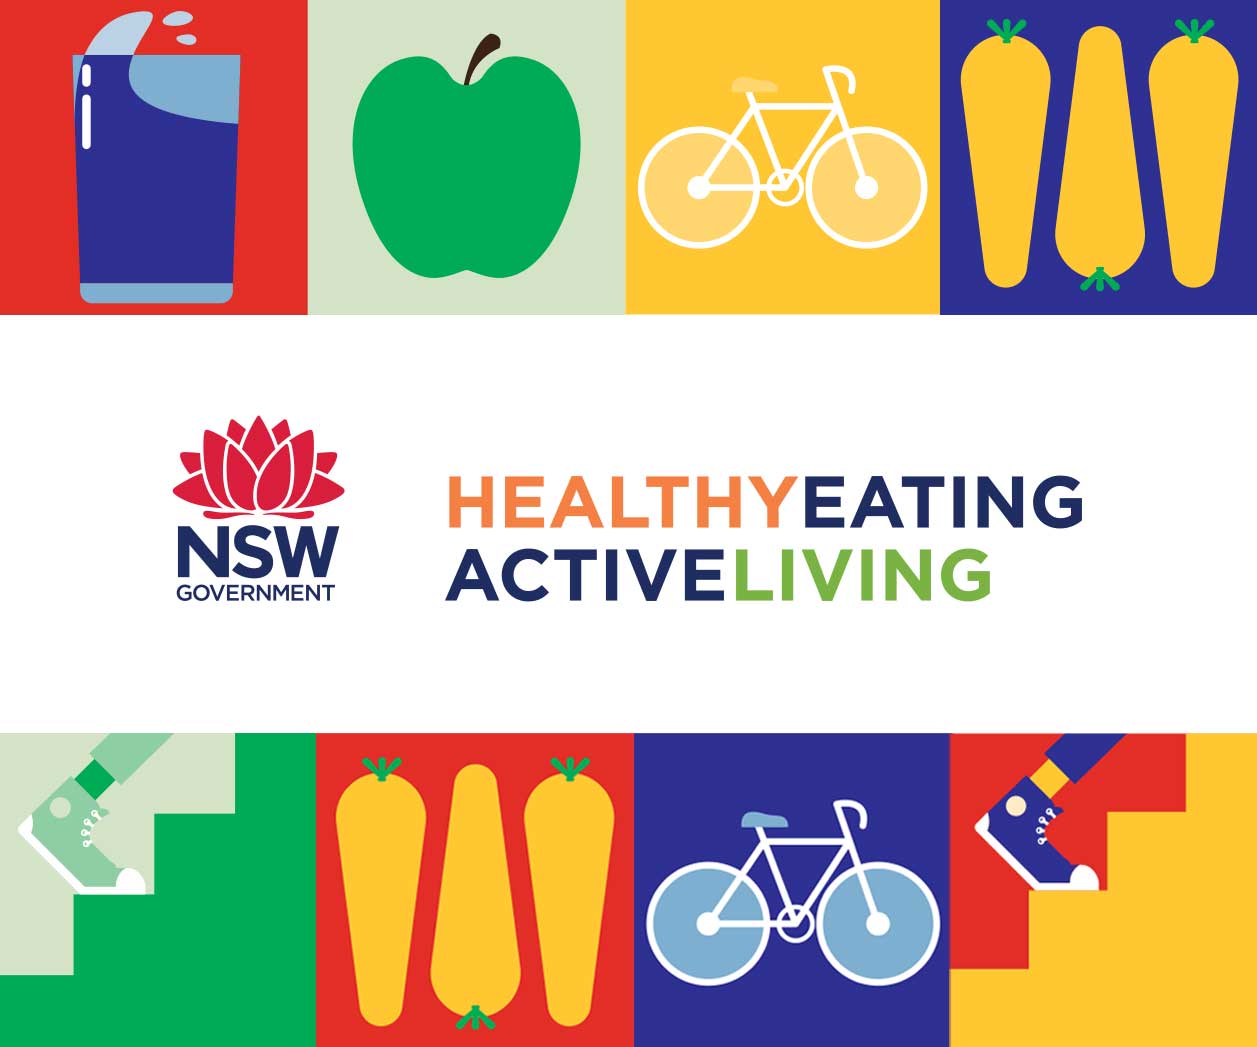 Brand Identity System Design project by Brand Agency, Percept, for NSW Government Health, Sydney, Australia, thumbnail image 1